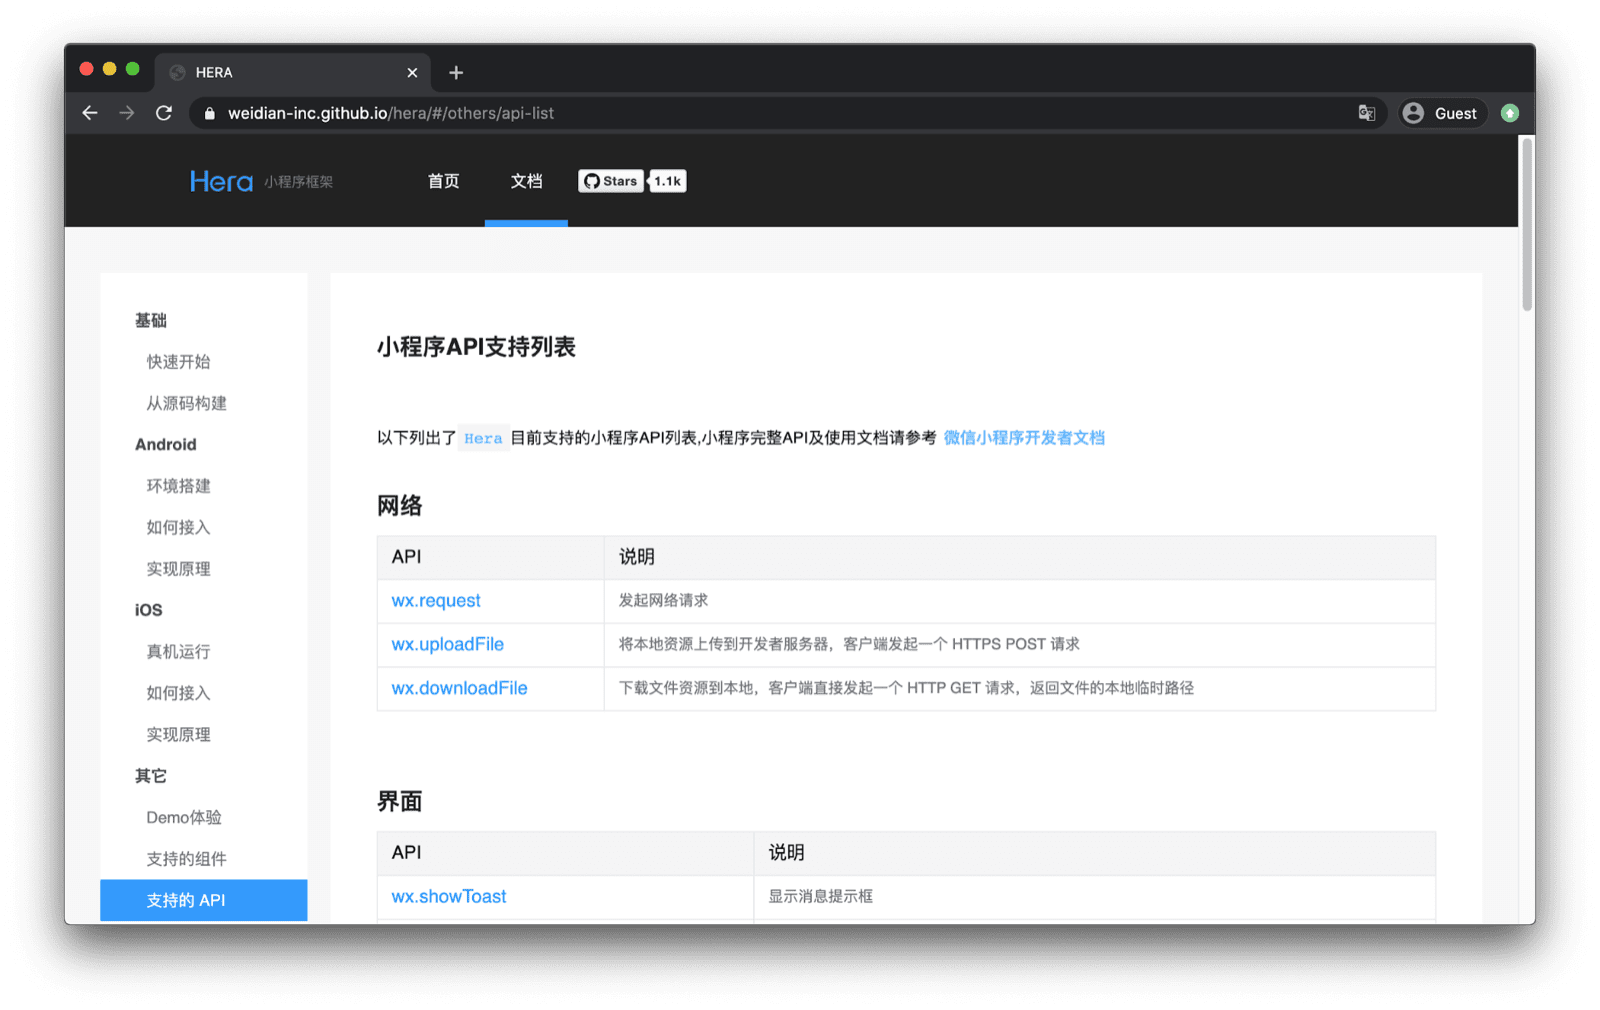 Documentation of the Hera mini app framework listing the WeChat APIs that it supports like `wx.request`, `wx.uploadFile`, etc.